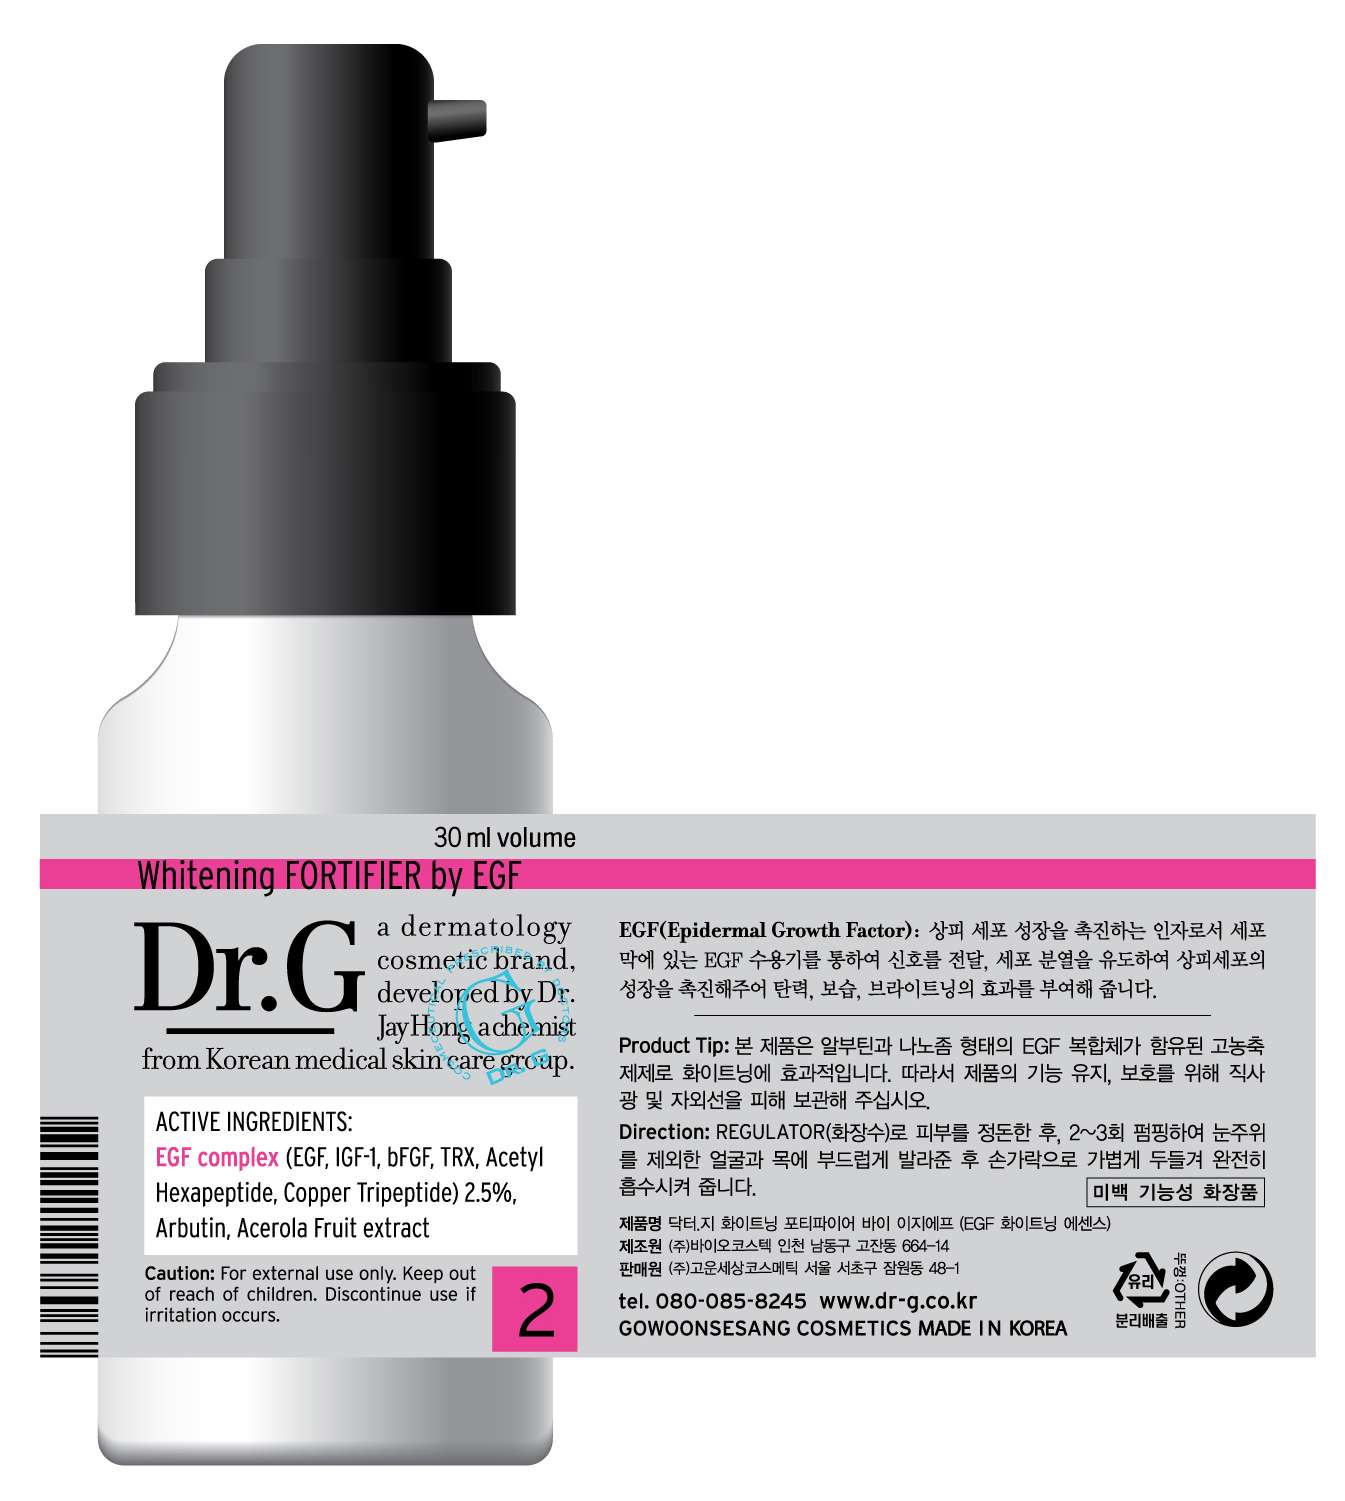 Dr G Whitening FORTIFIER by EGF